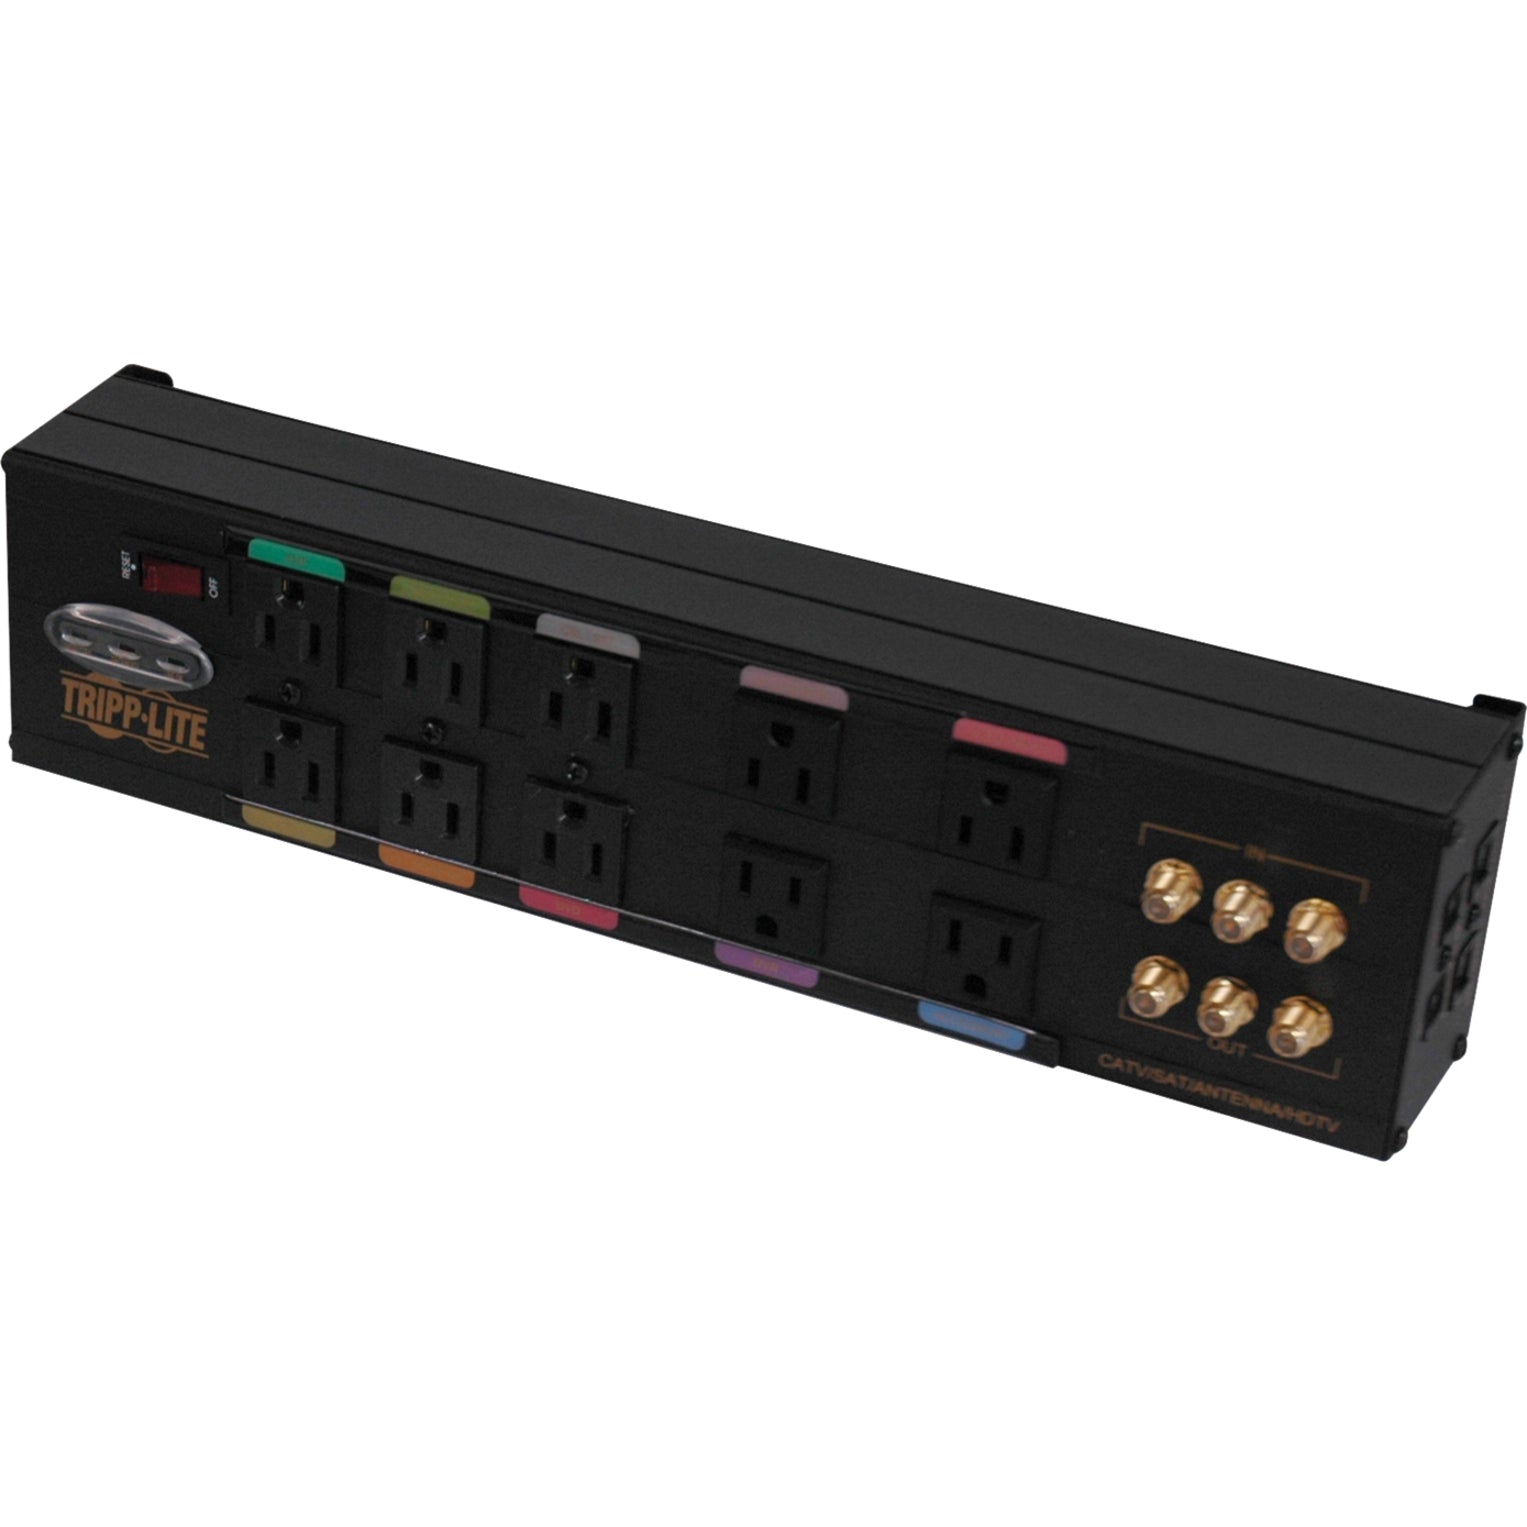 Tripp Lite HT10DBS Isobar Home/Business Theater Surge Suppressor, 10 Outlets, 3840J